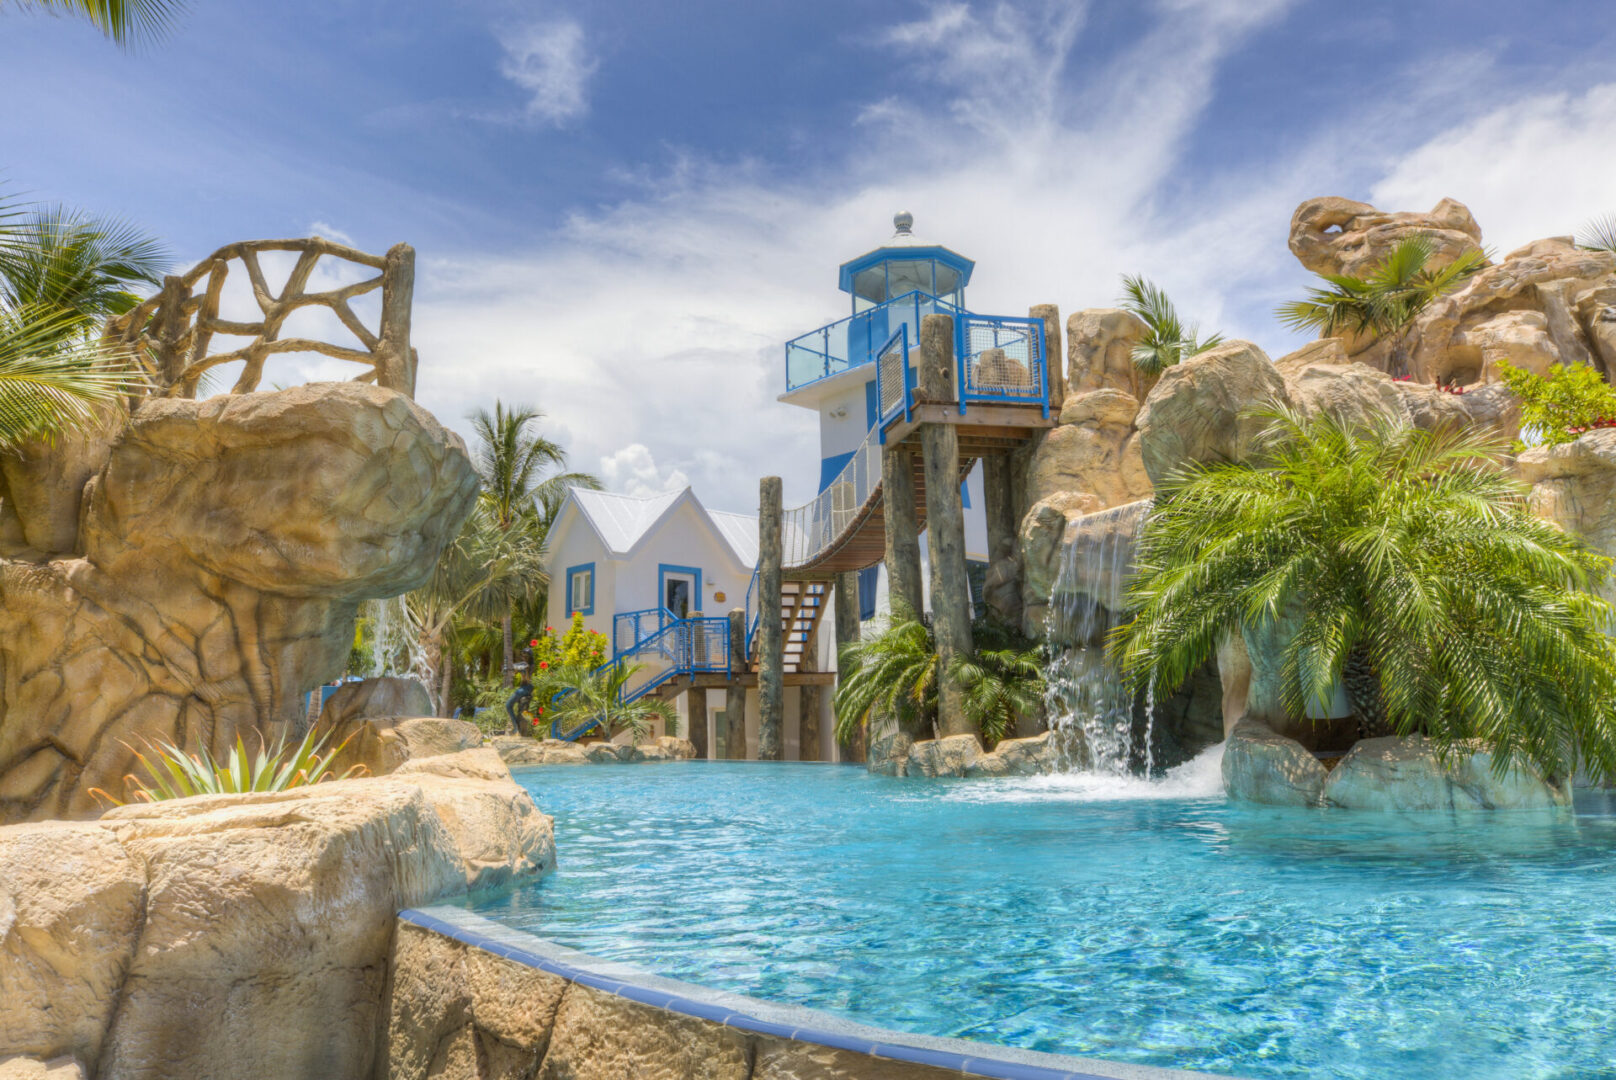 A pool with water slides and a tower.